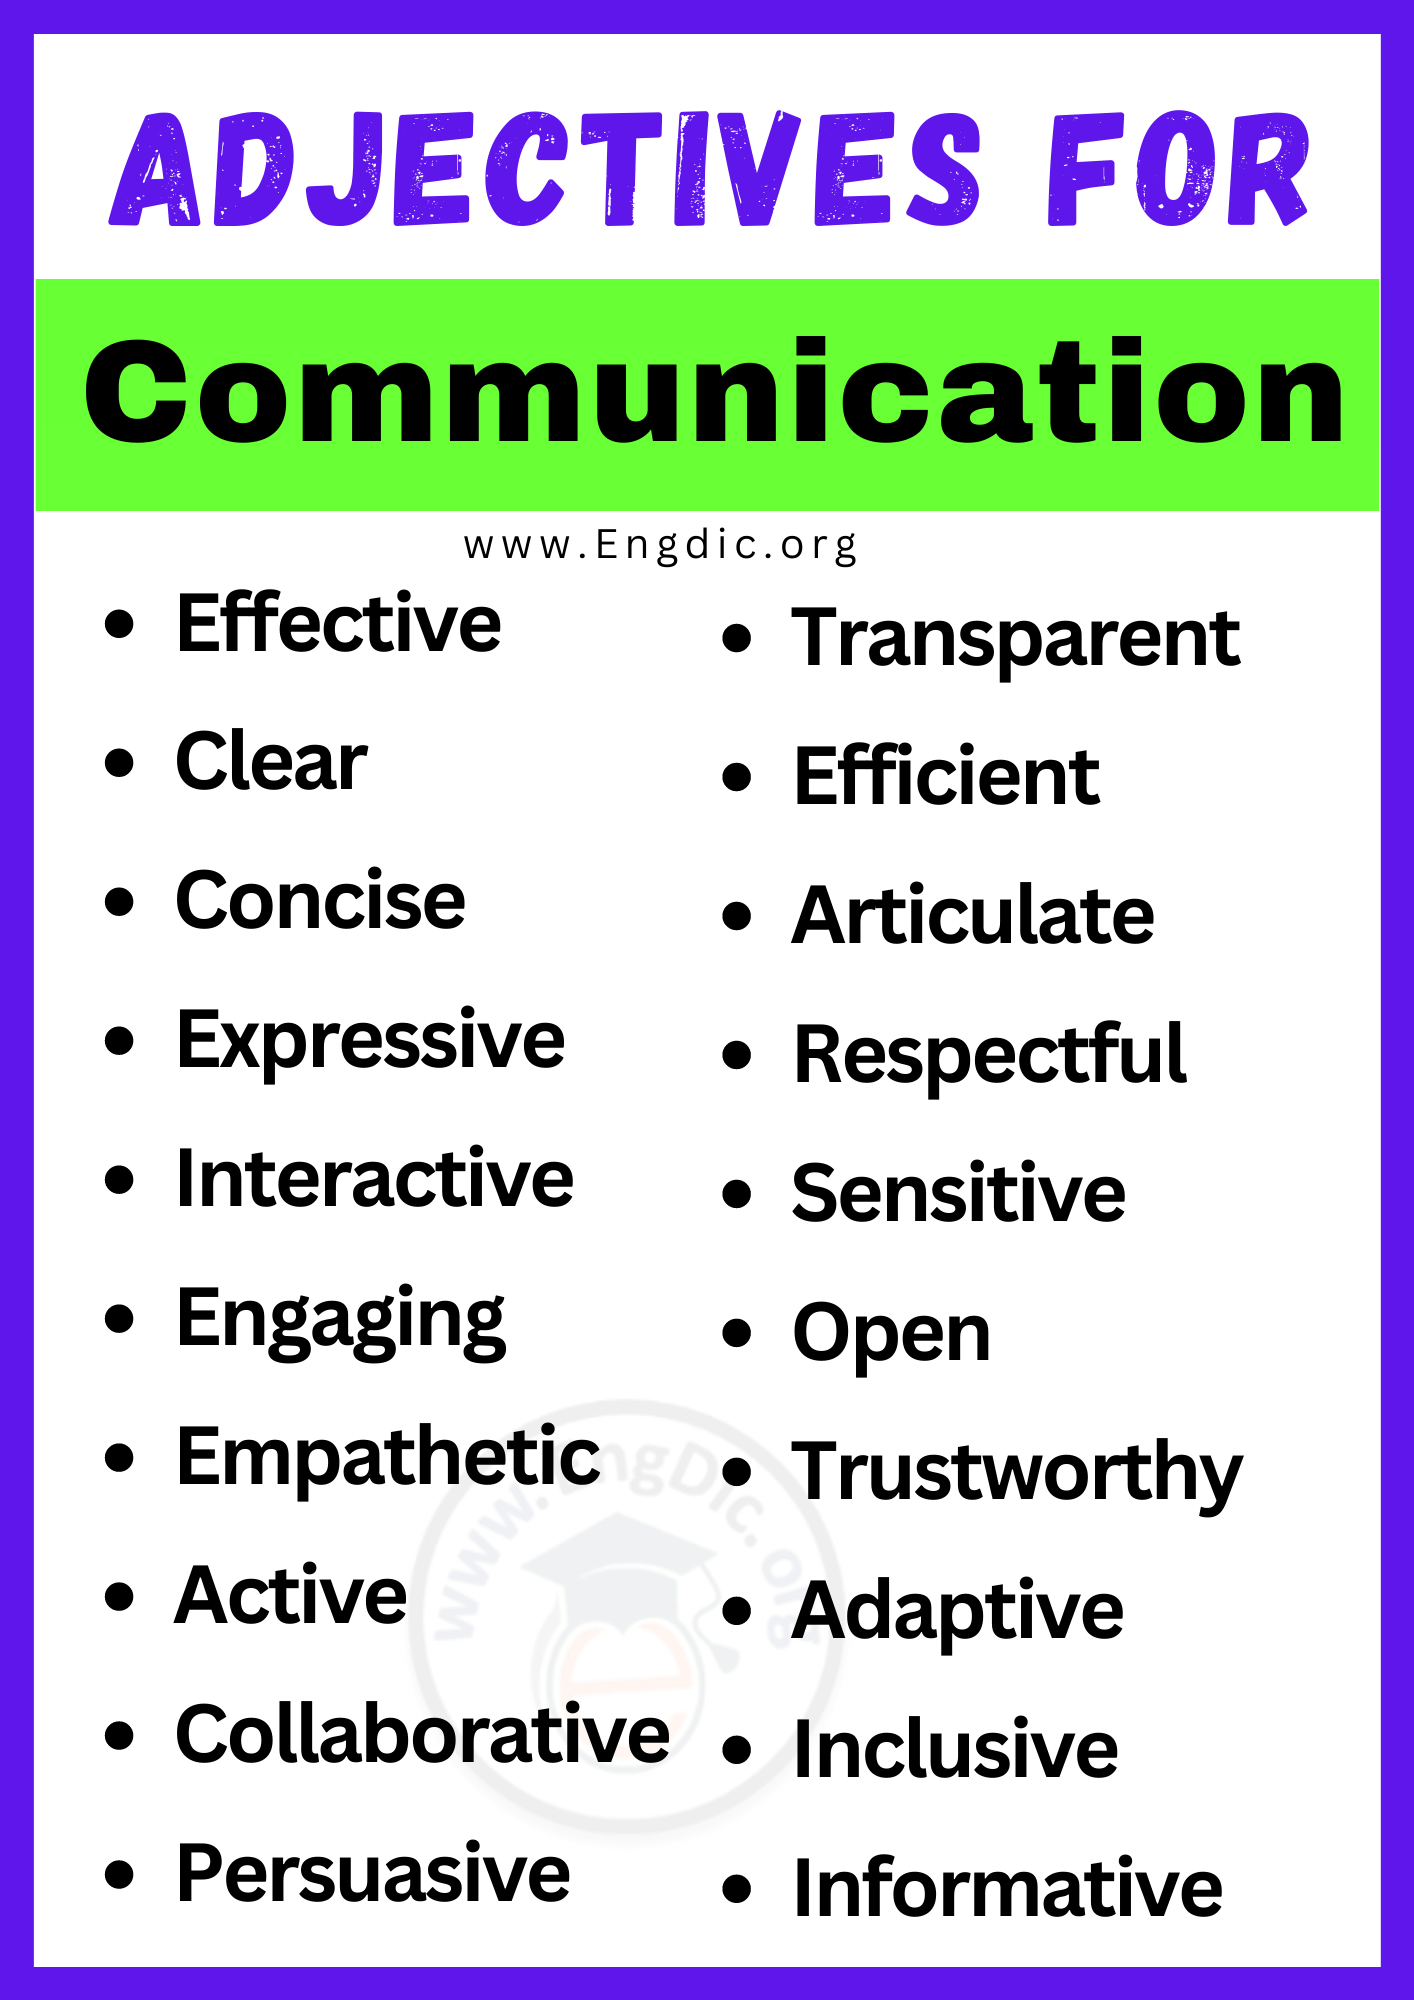 Adjectives for Communication